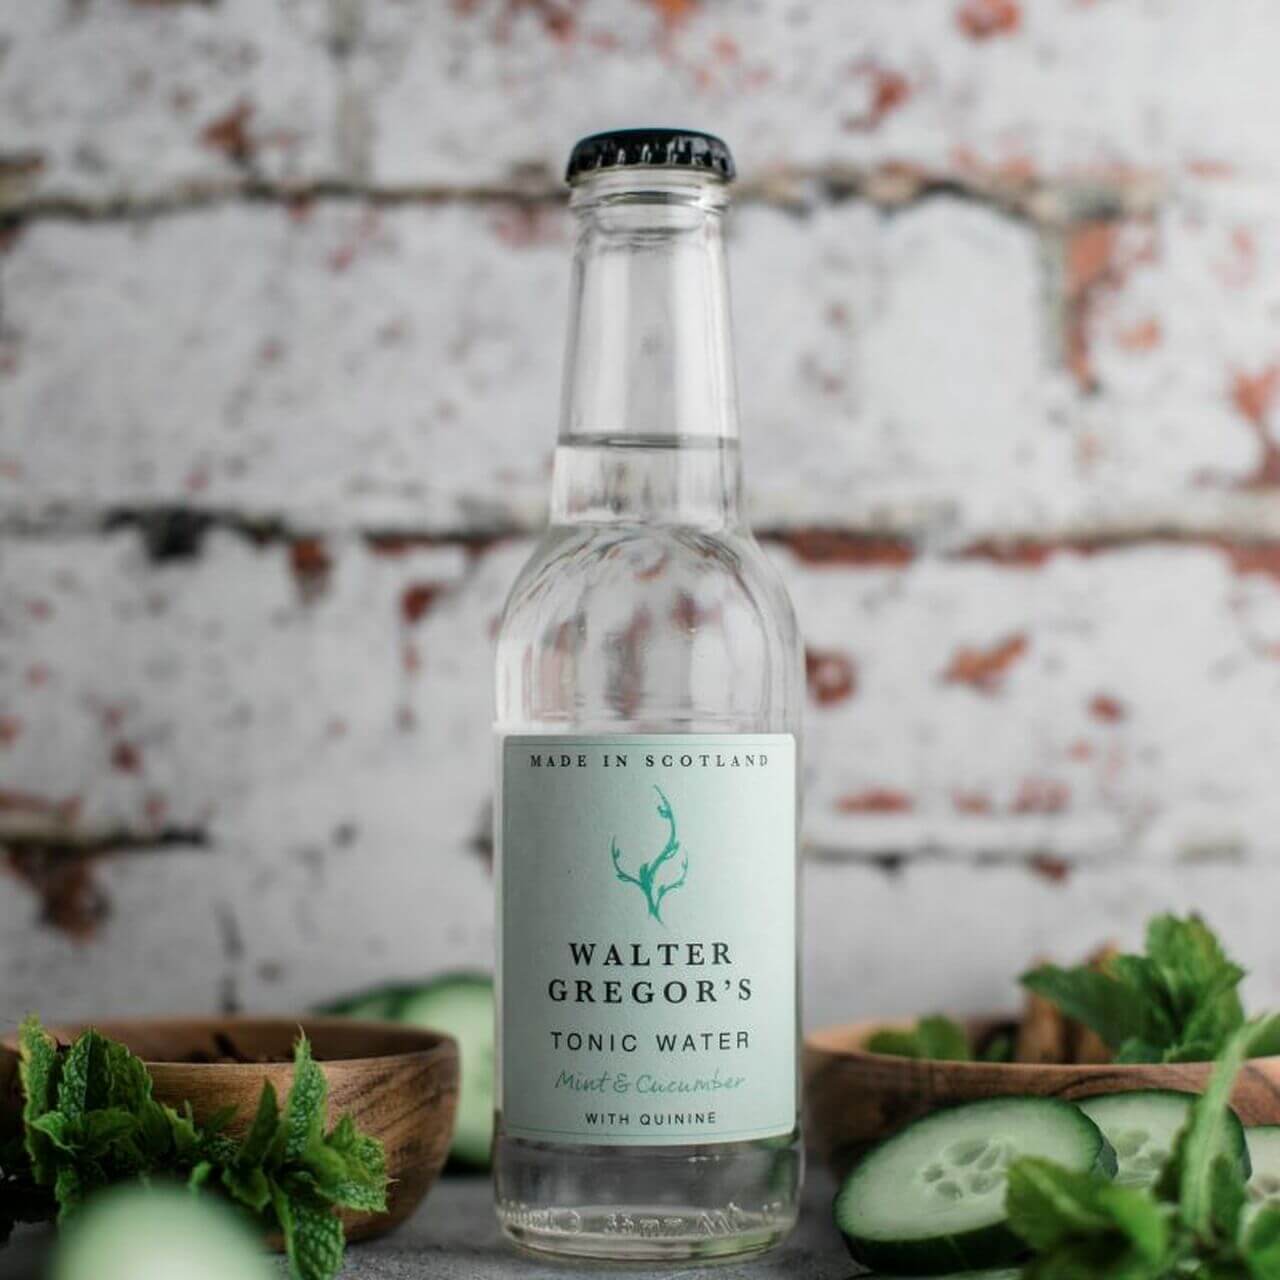 Image of Tonic Water made in the UK by Walter Gregor's. Buying this product supports a UK business, jobs and the local community